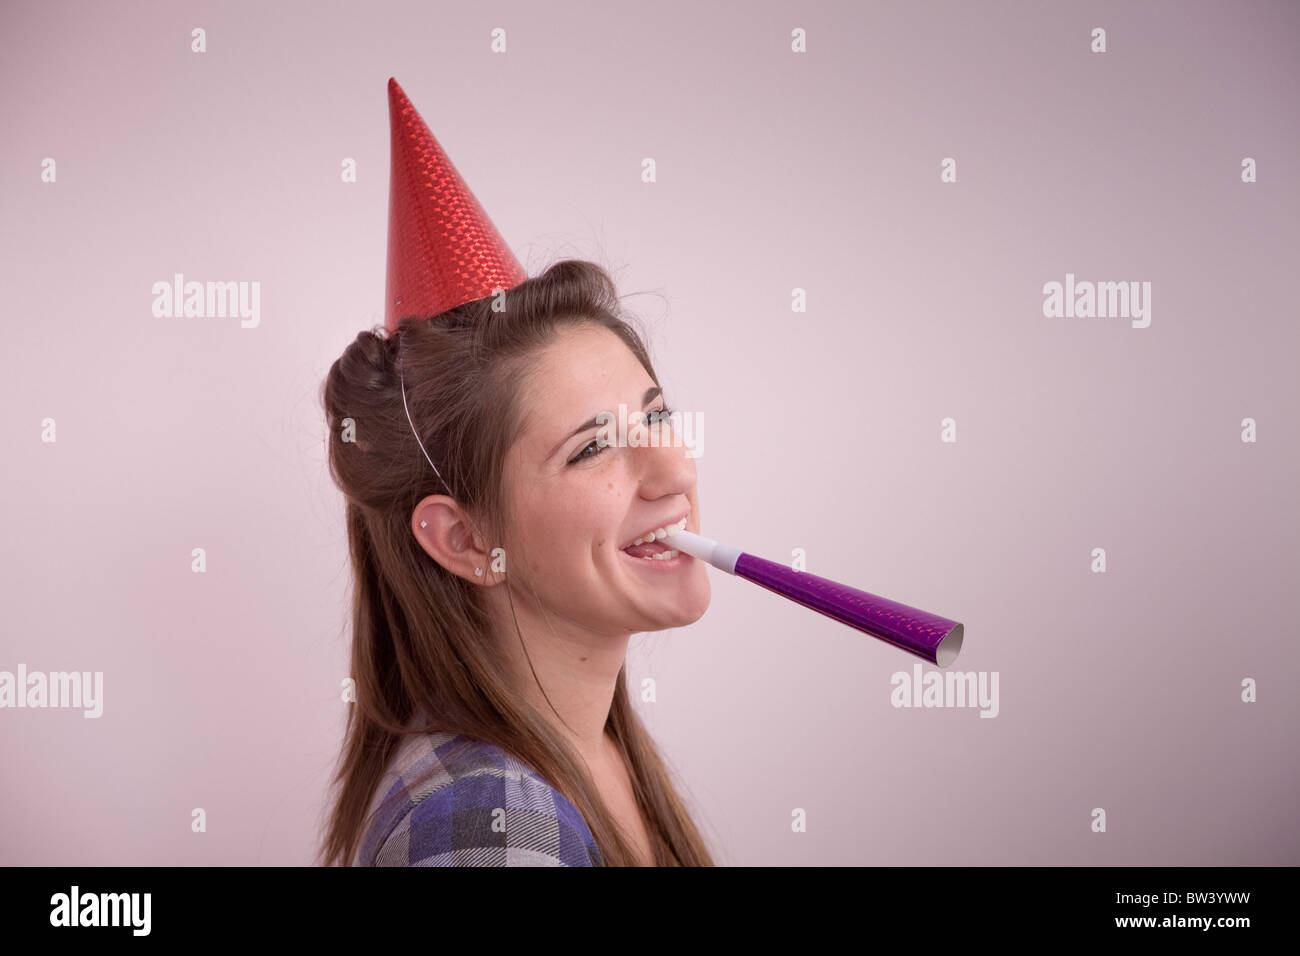 Teen girl (Age 15) with a party hat and noisemaker Stock Photo